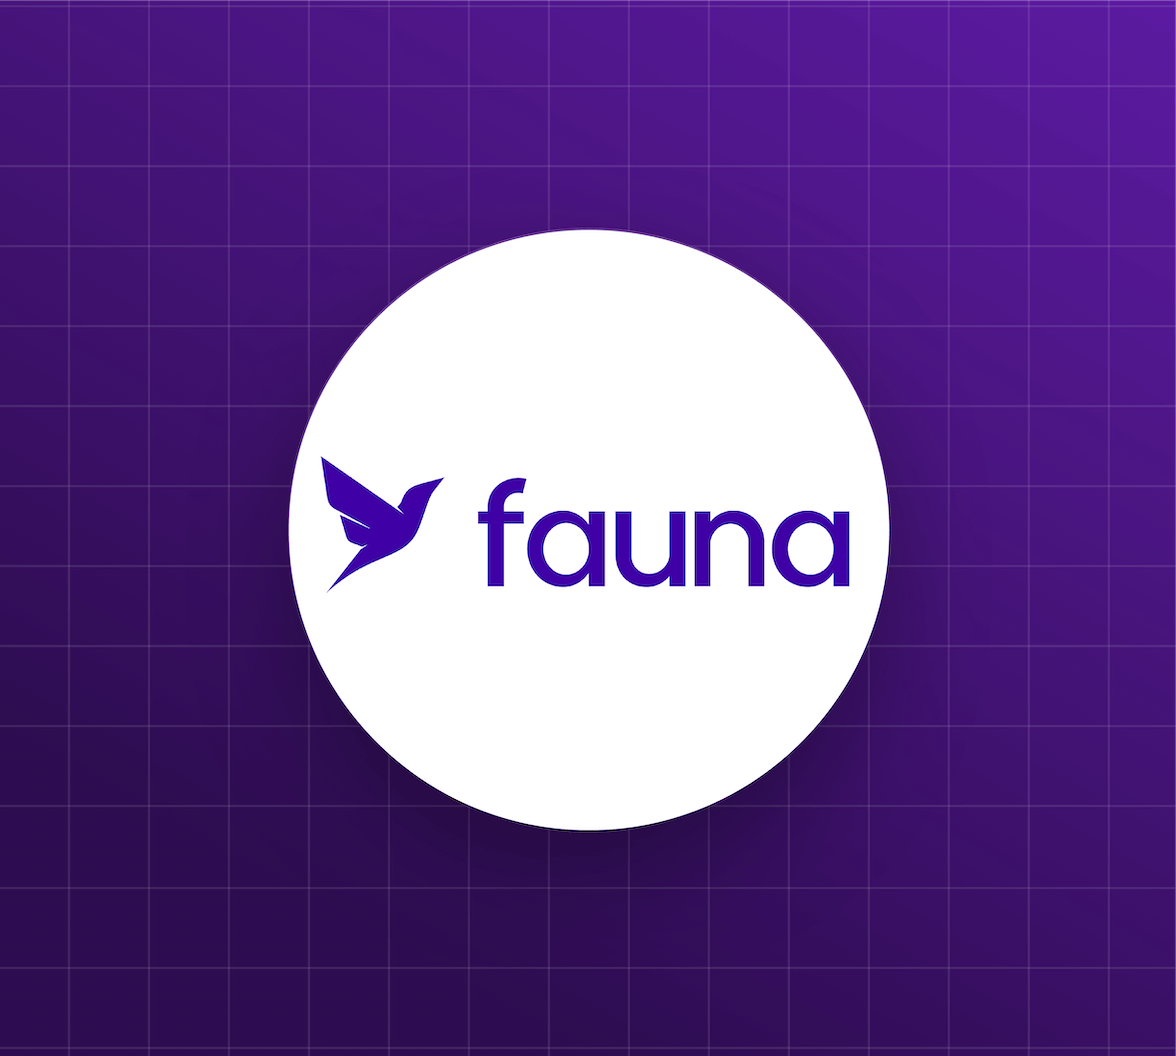 What Is Fauna, and How Does It Work With Auth0?